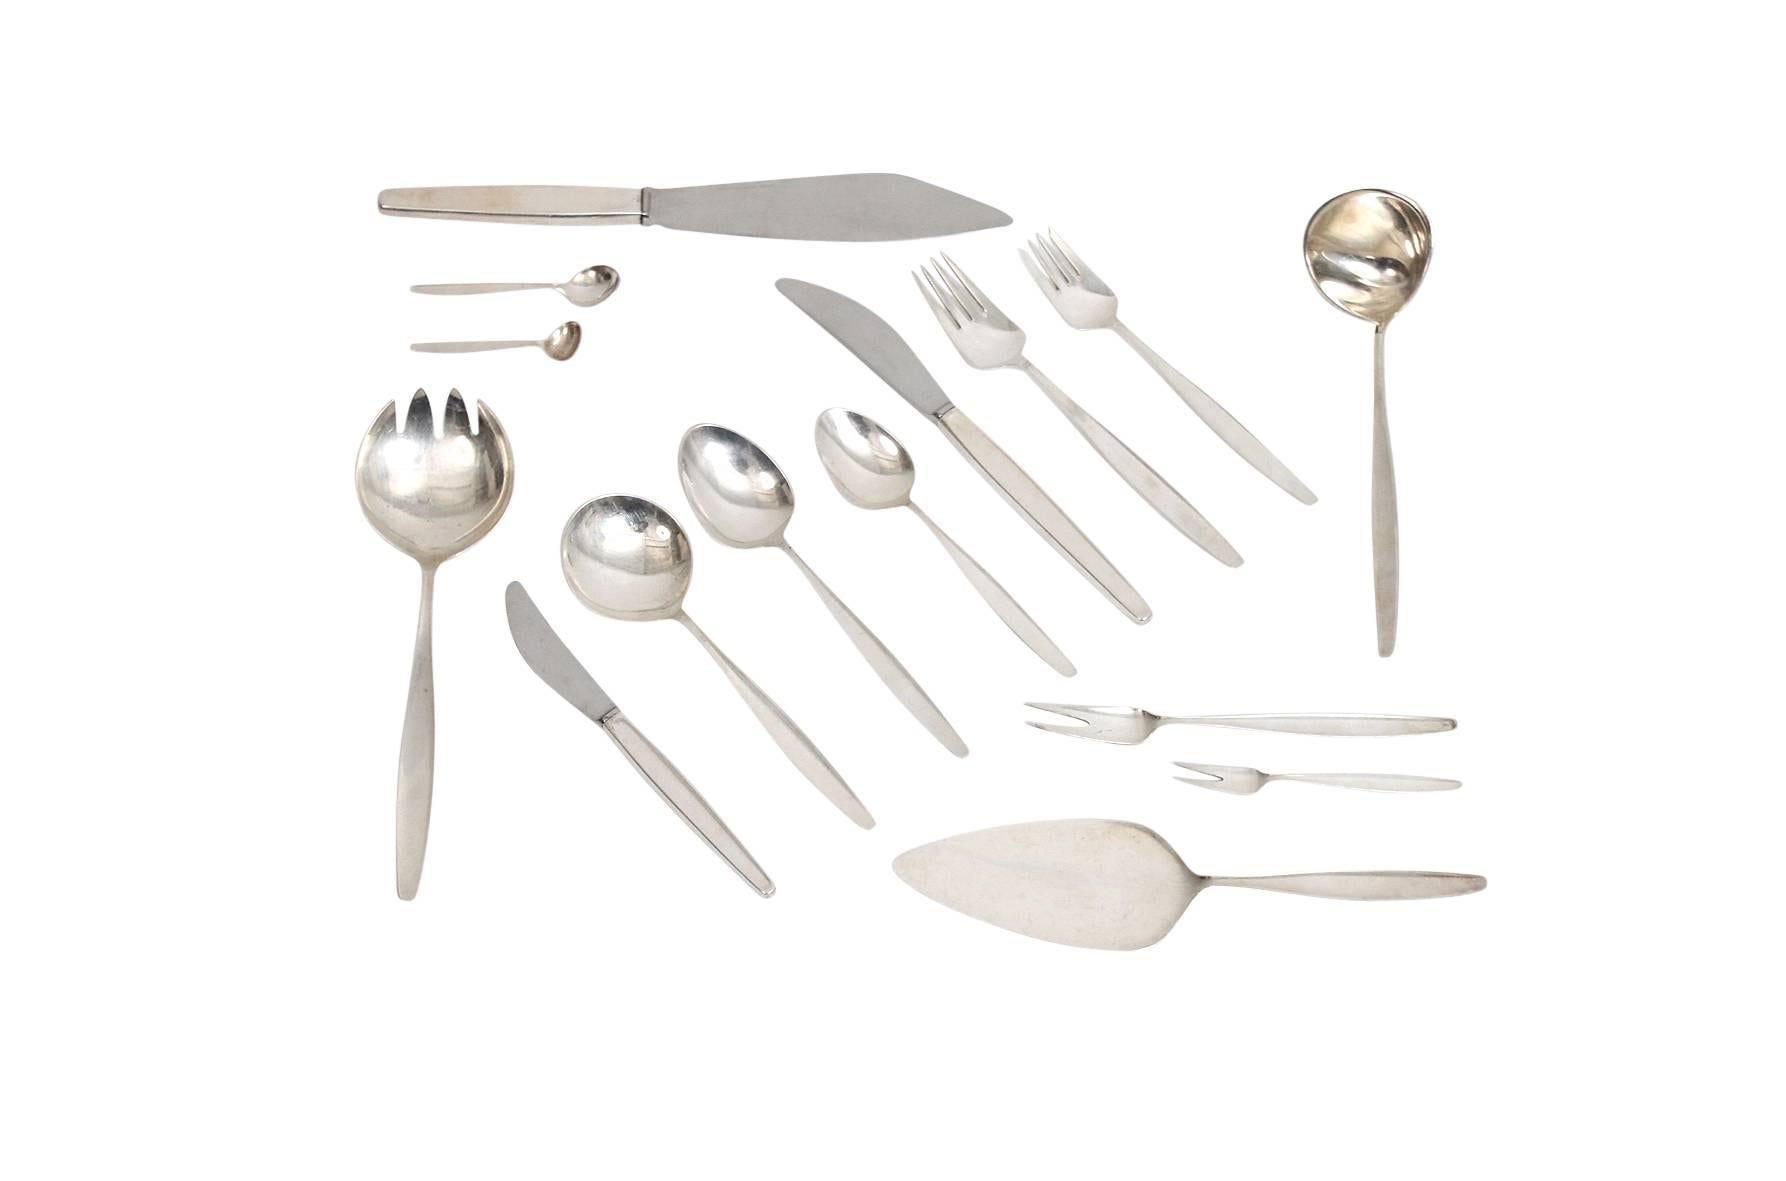 Extensive 120 piece set of sterling silver flatware by Norwegian designer Tias Eckhoff for Georg Jensen. All pieces signed with Jensen's impressed mark. Complete seven piece service for eight or four-piece service for 16 with 14 serving pieces.